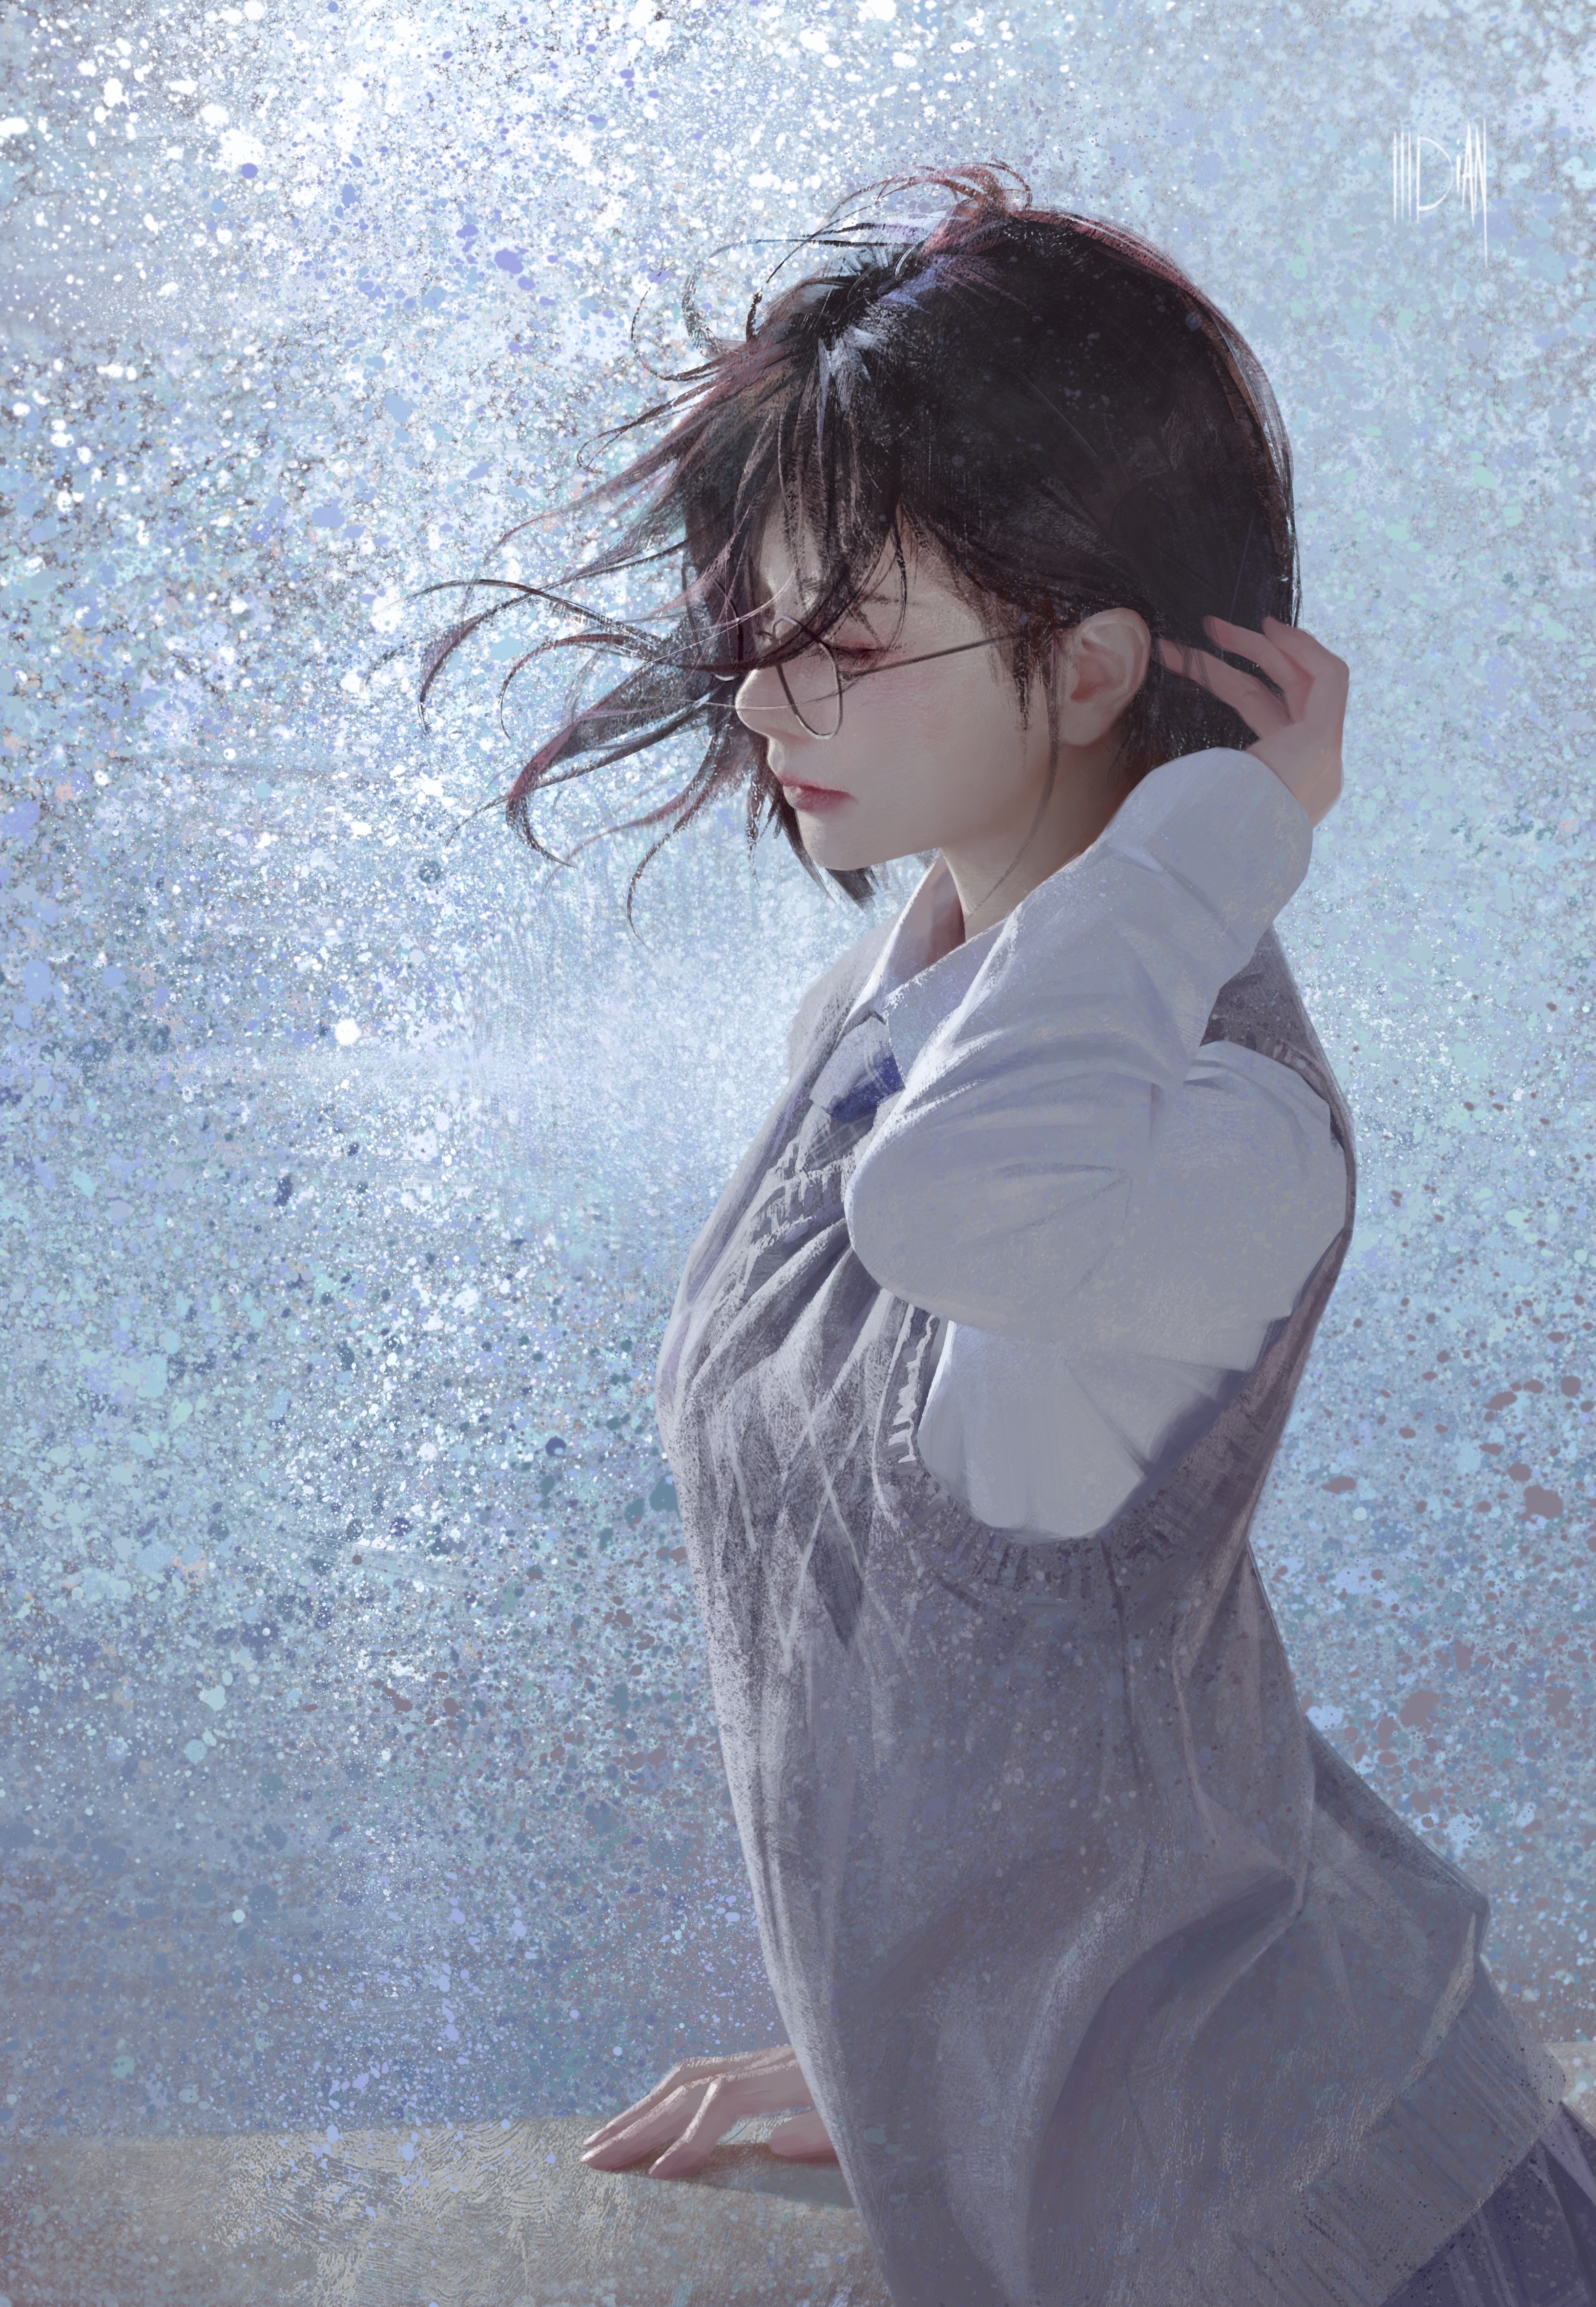 General 3269x4724 ILLDIAN digital art artwork illustration women glass women with glasses dark hair closed eyes hair blowing in the wind watermarked profile portrait display standing simple background Asian